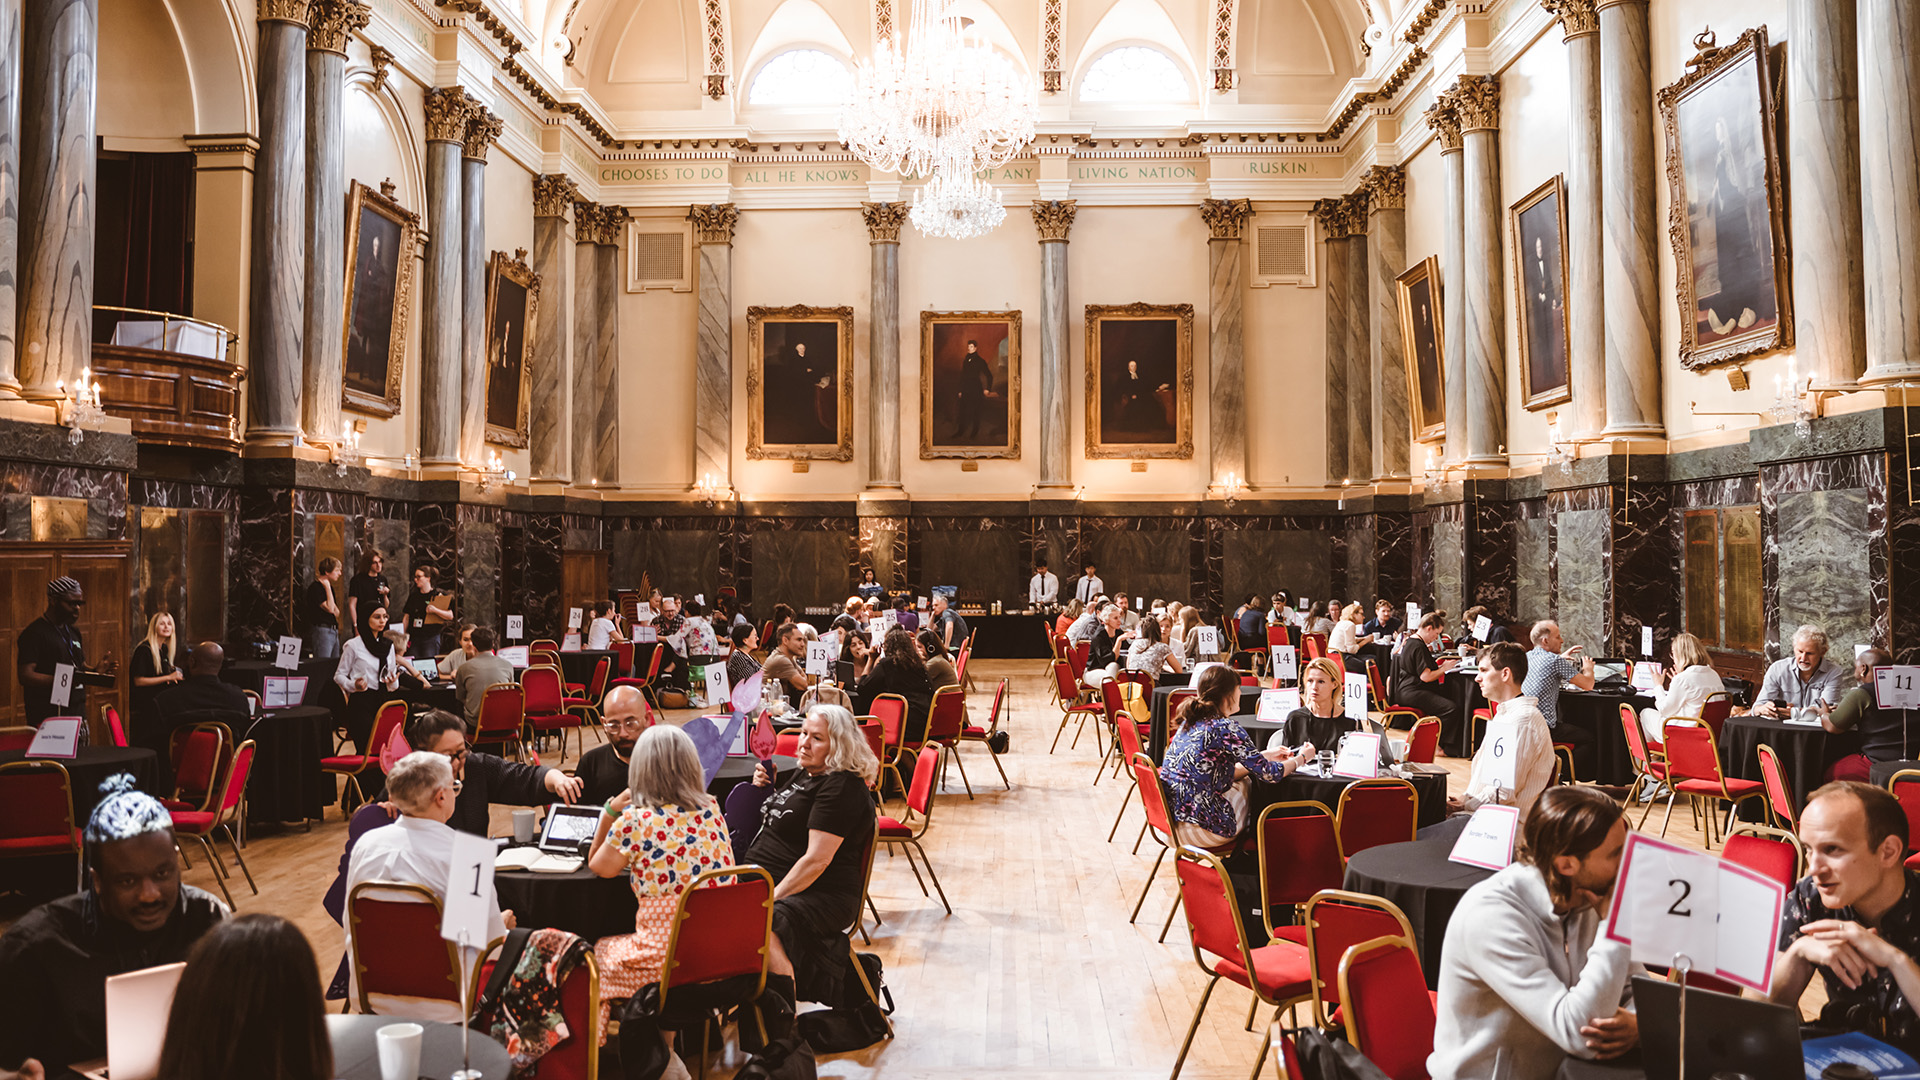 Groups of people chatting whilst sat around round tables, in a grand hall.